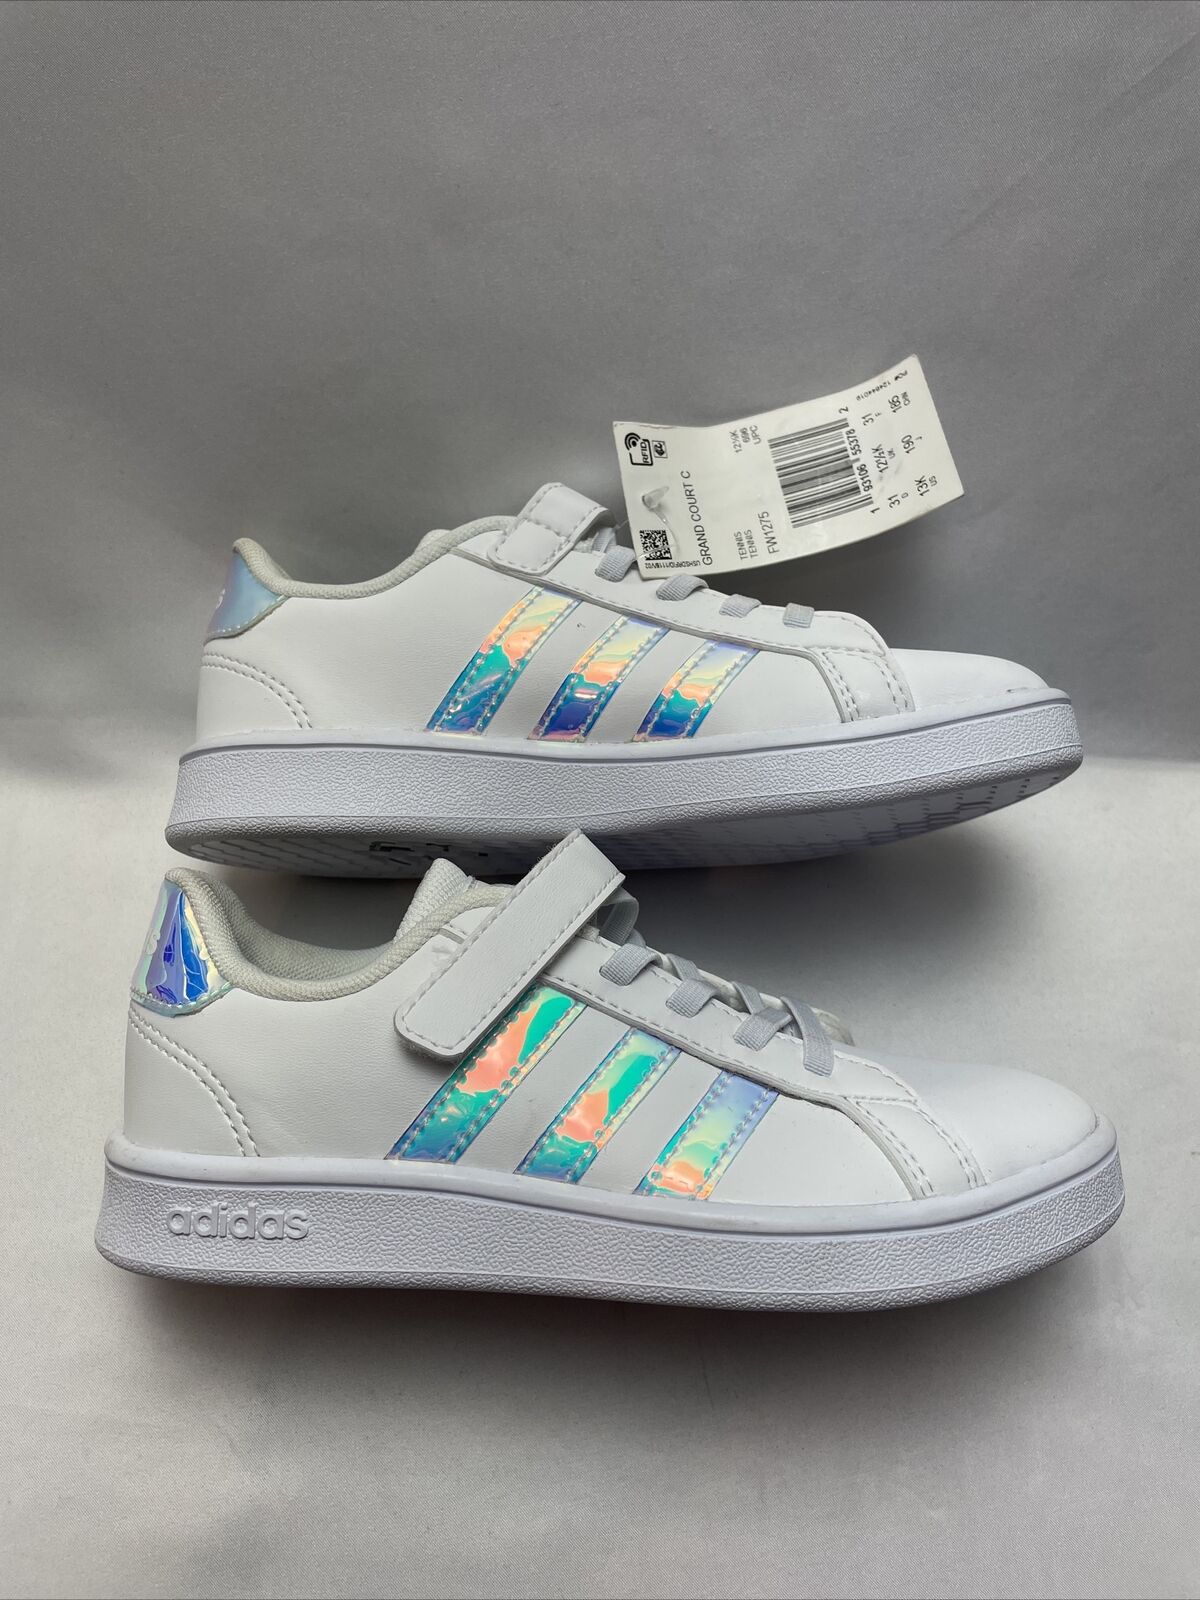 adidas Grand Court C Tennis Shoes FW1275 Sneaker Girl's Size 13 White Iridescent